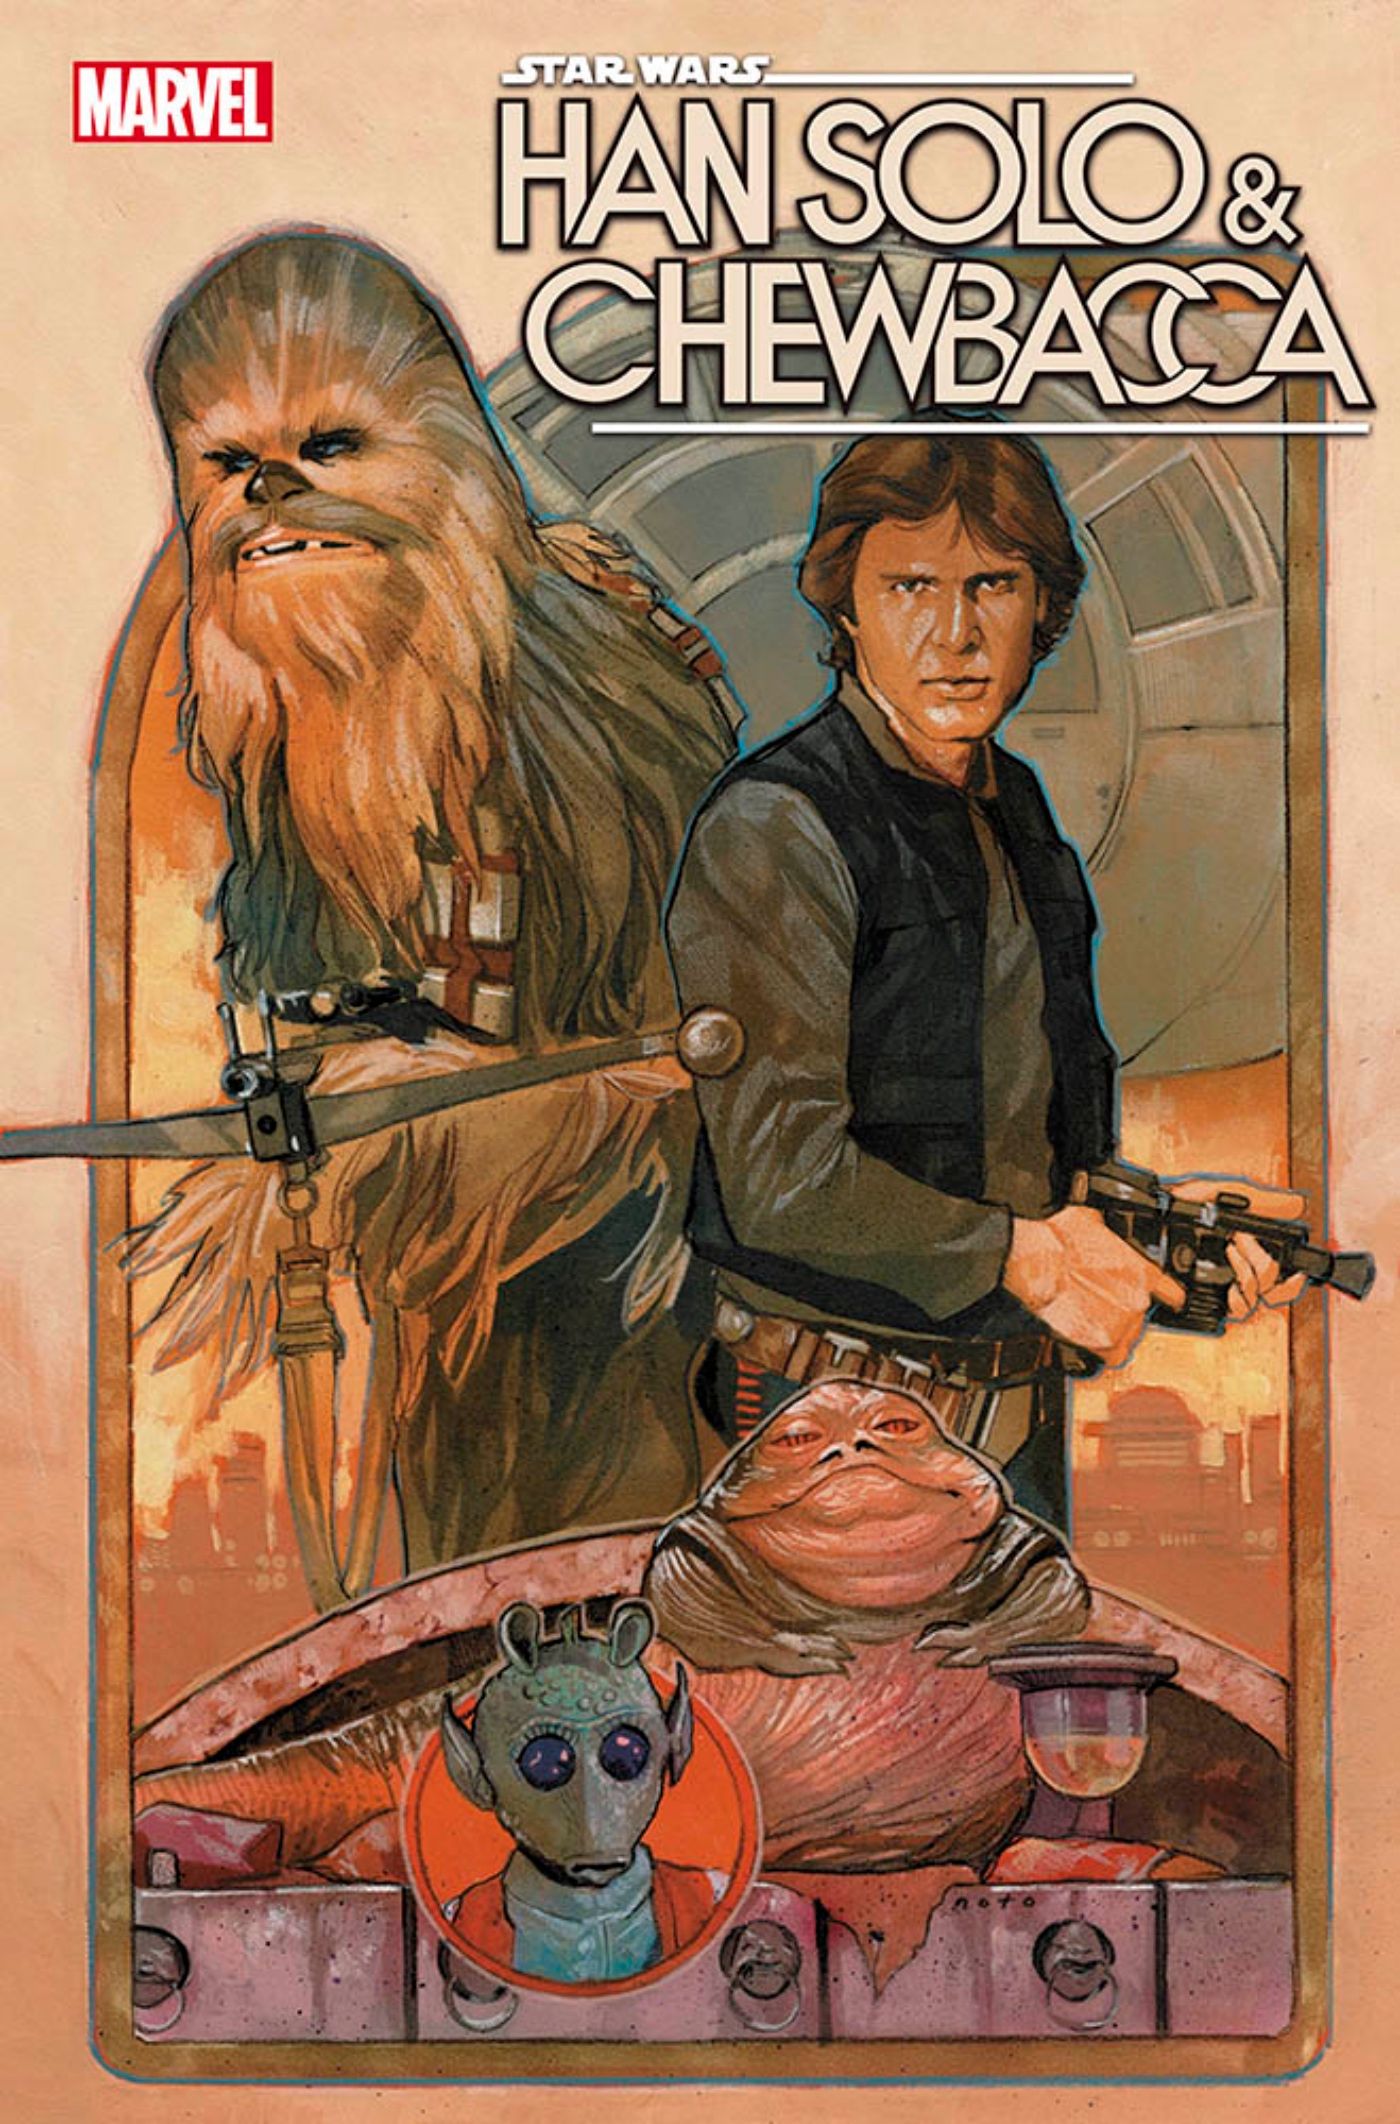 Star Wars New Han Solo And Chewbacca Series Coming From Marvel Comics